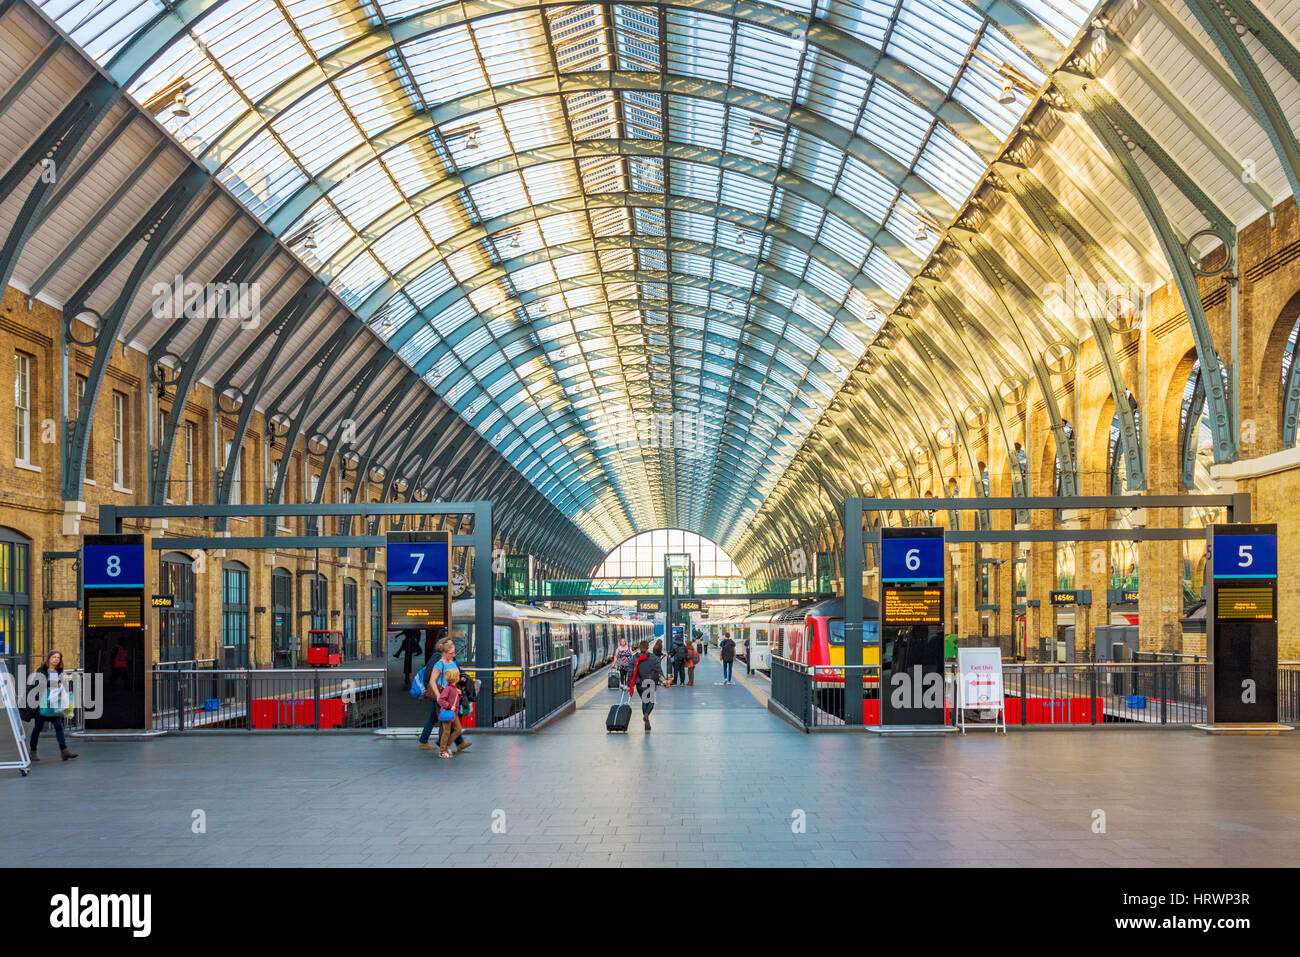 LONDON, UNITED KINGDOM - OCTOBER 31: This is Kings Cross St Pancras railway station platform where trains wait for passengers to board on October 31,  Stock Photo